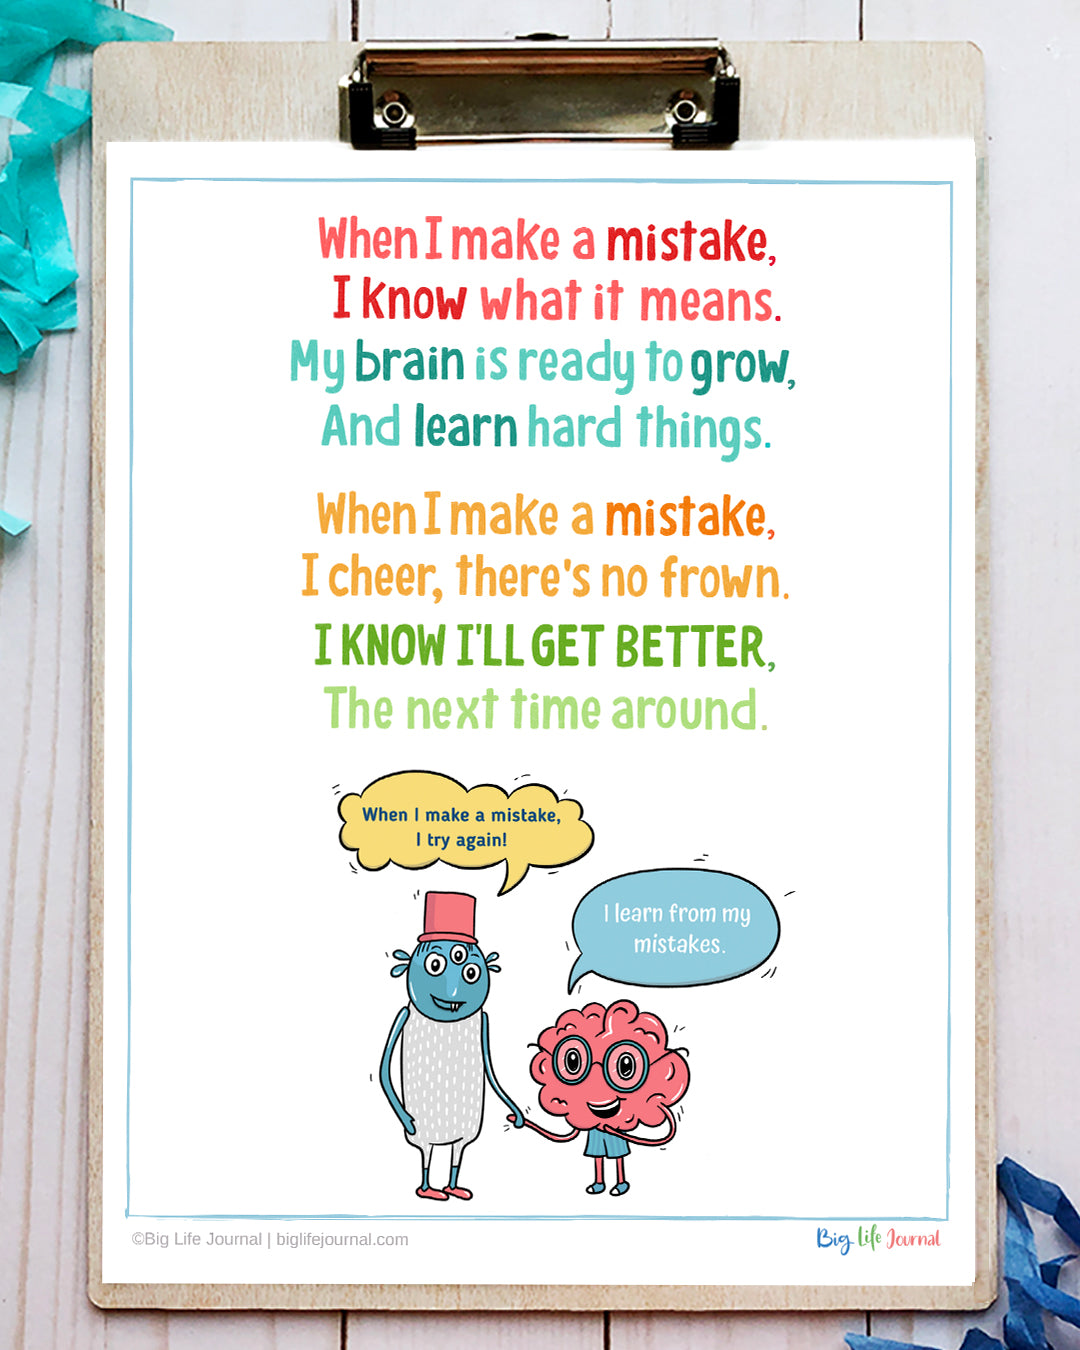 Beautiful Growth Mindset Resources from Big Life Journal - Bits of